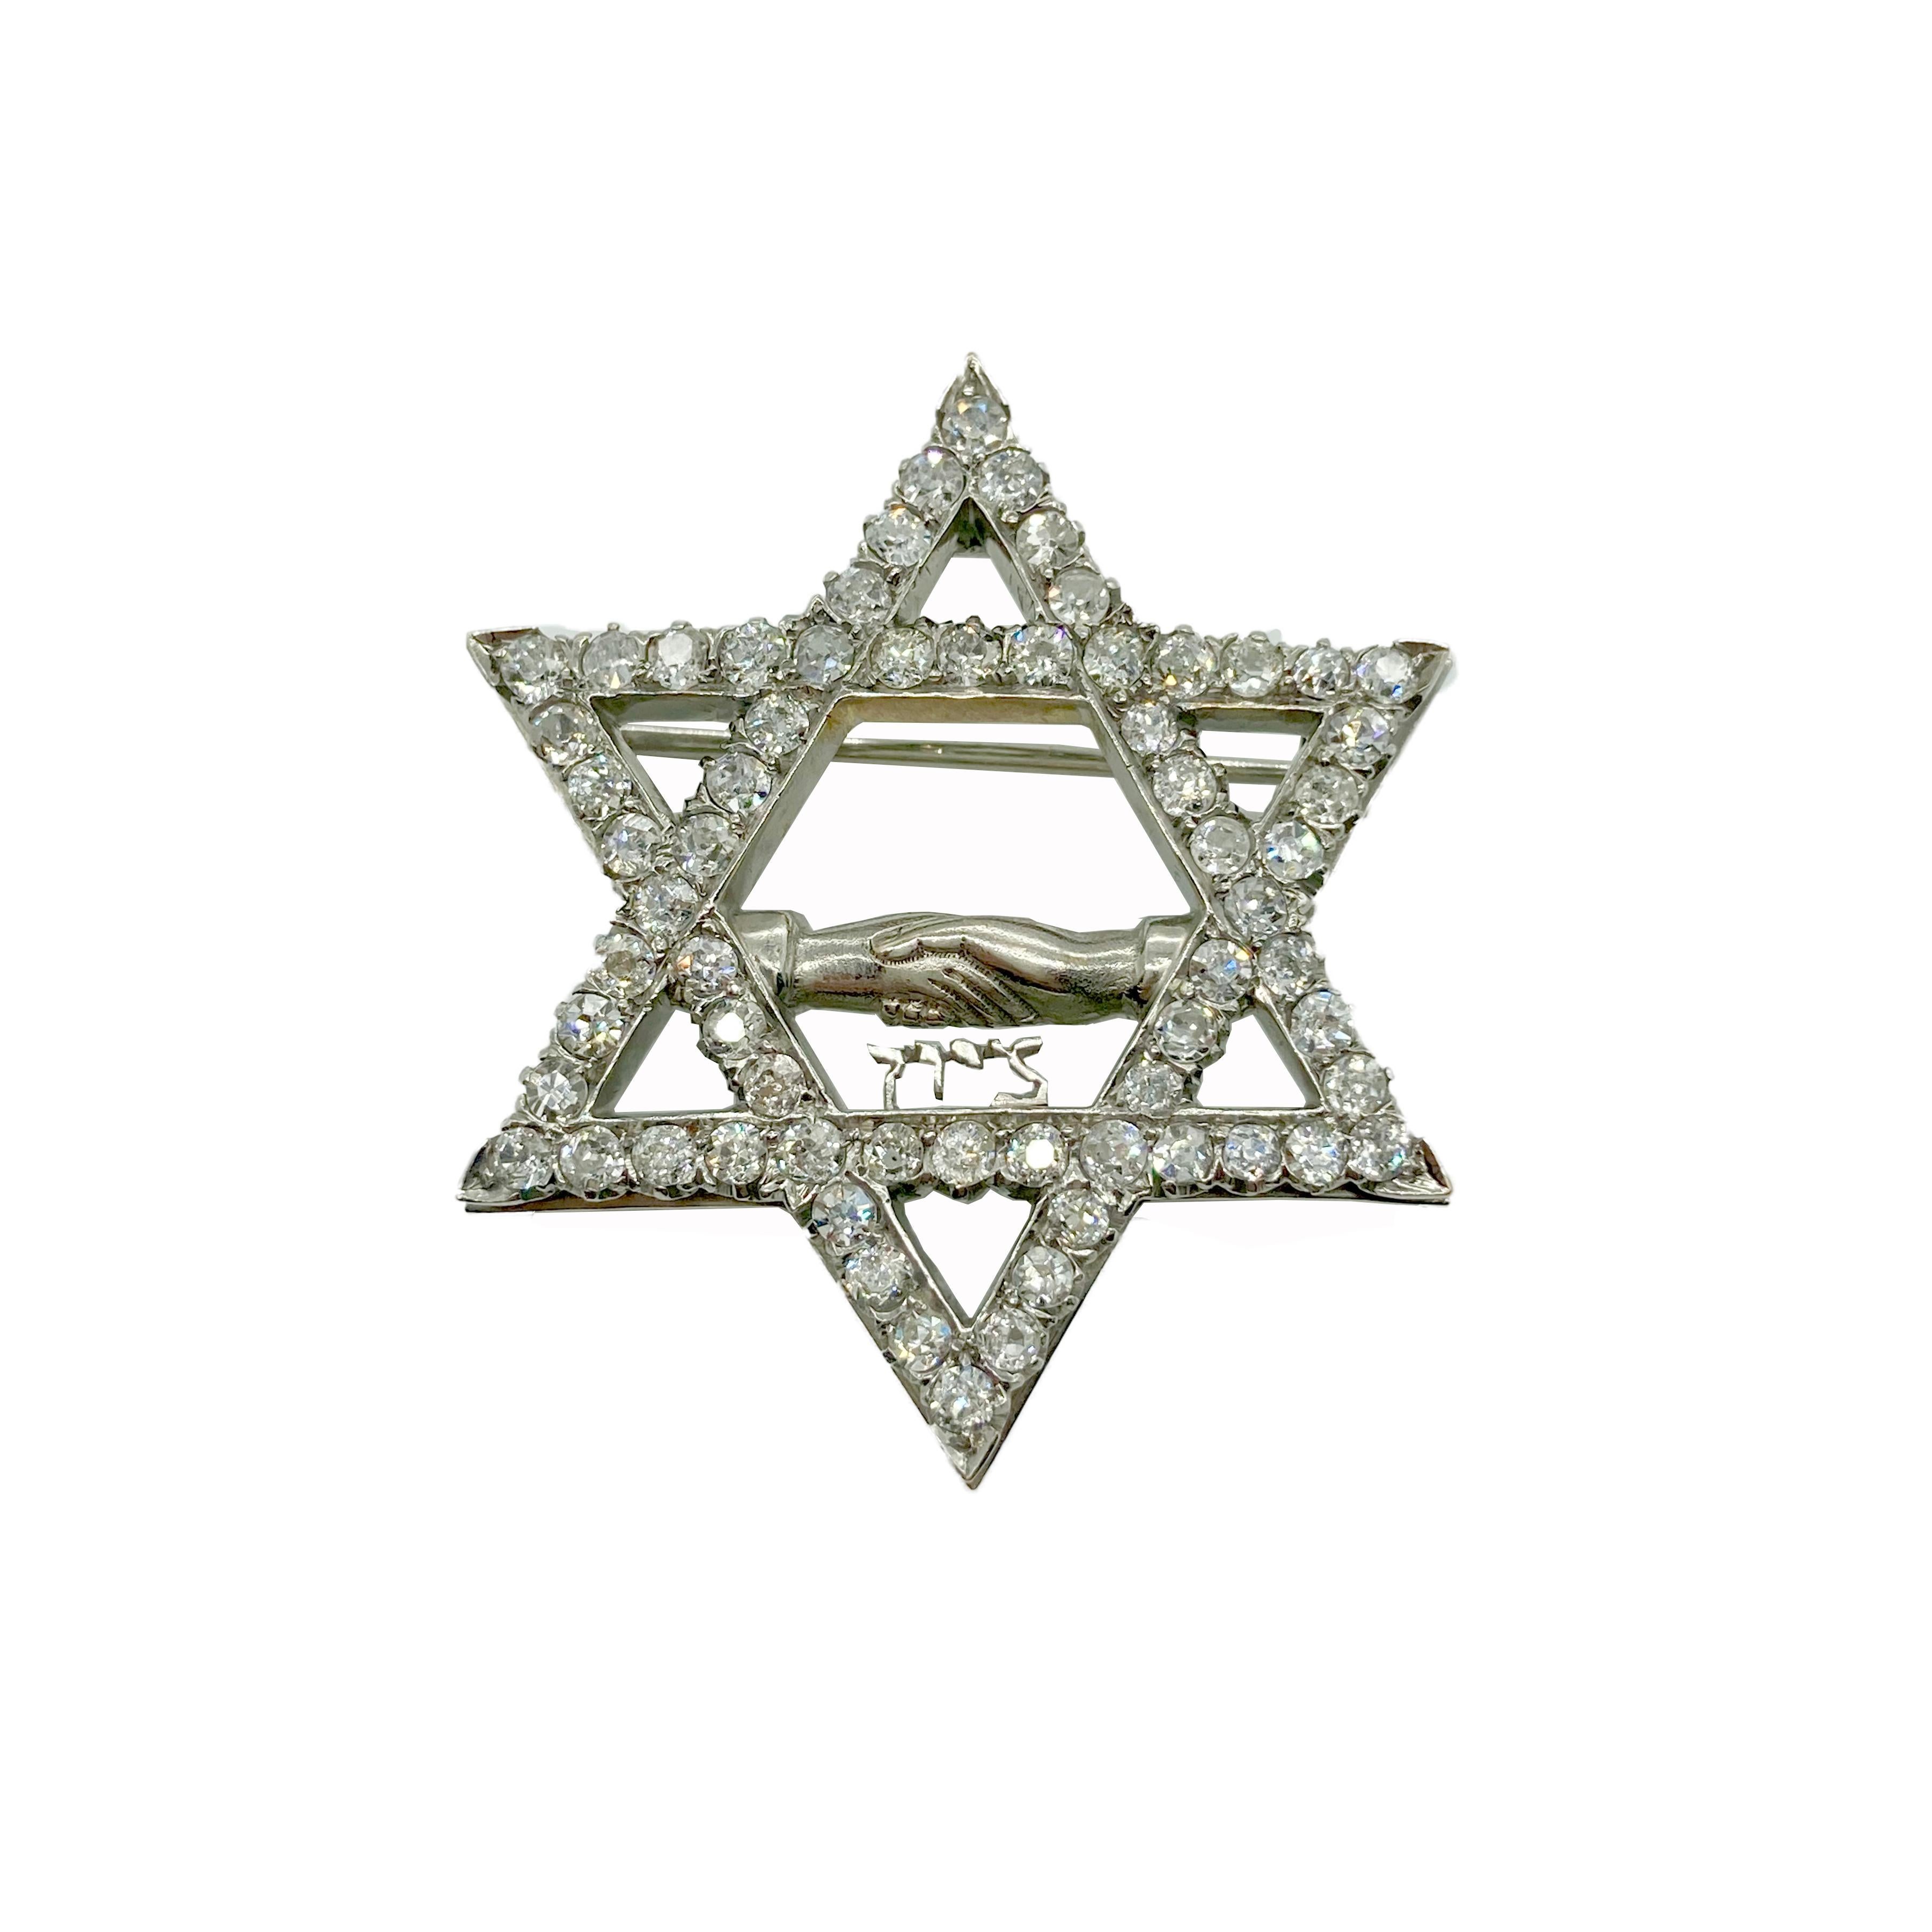 A stunning Star of David white gold brooch with 6 carats of old cut diamonds. With a Hebrew inscription reading “Zion”. Circa 1920s.